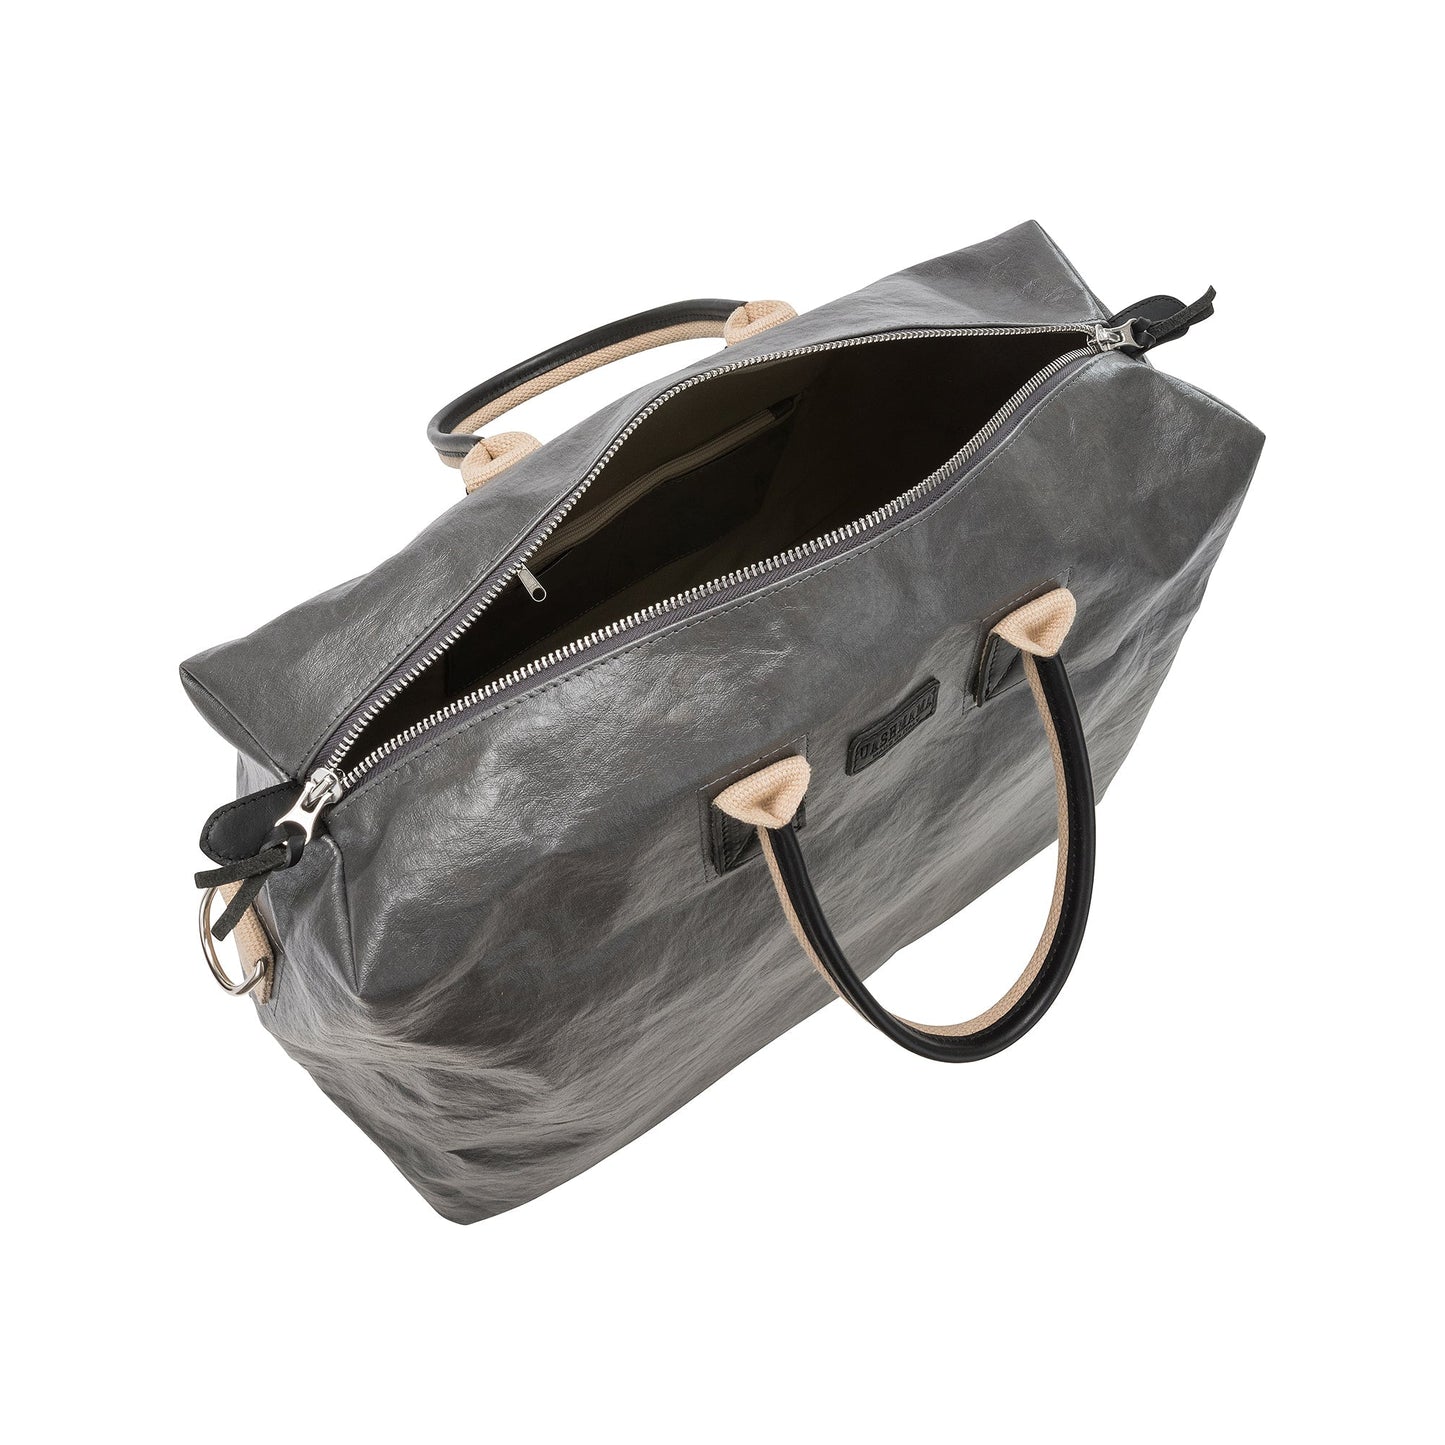 An extra large washable paper holdall is shown from above with the zip open. This shows an internal zipped pocket and organic cotton lining. The bag has two recycled cotton carry handles and a recycled cotton shoulder strap. The bag shown is dark grey.